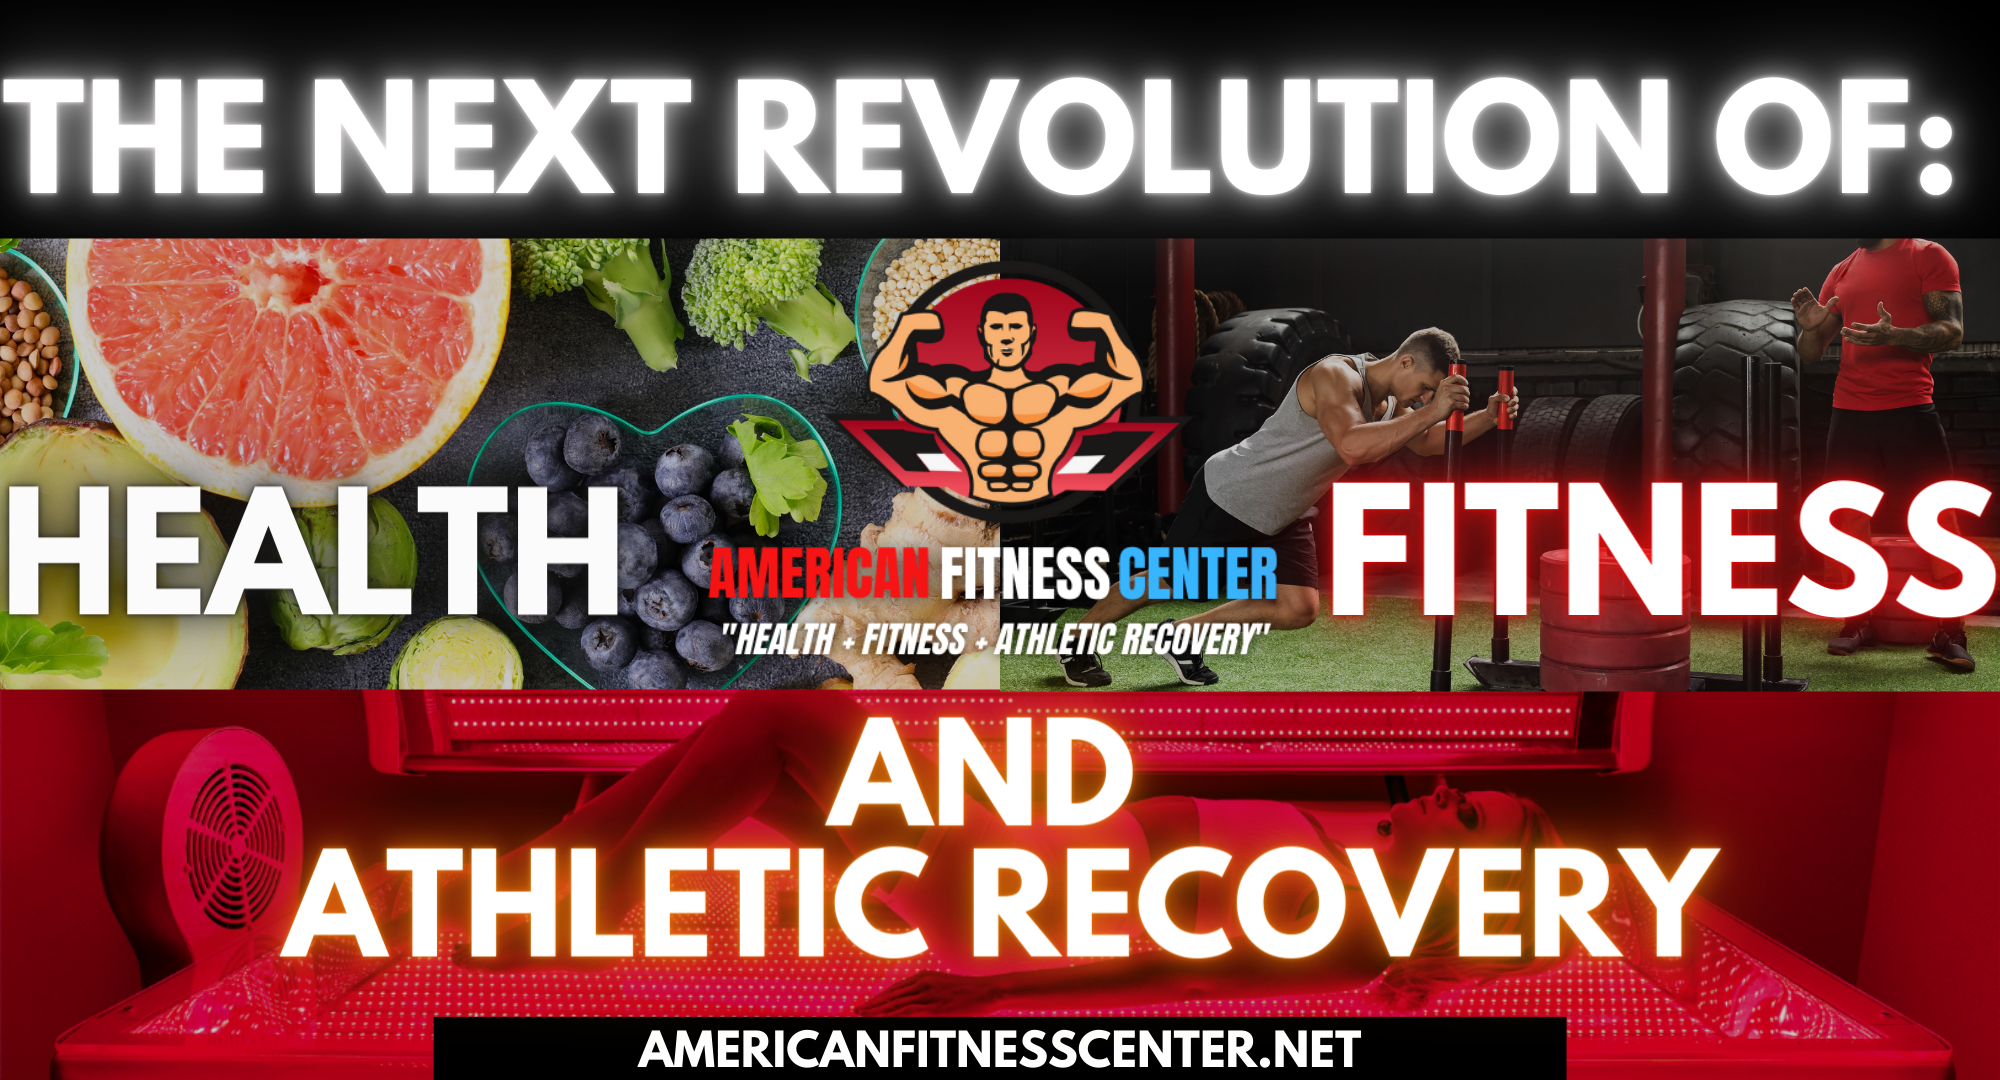 American Fitness Center - The Next Revolution of Health, Fitness, and Athletic Recovery